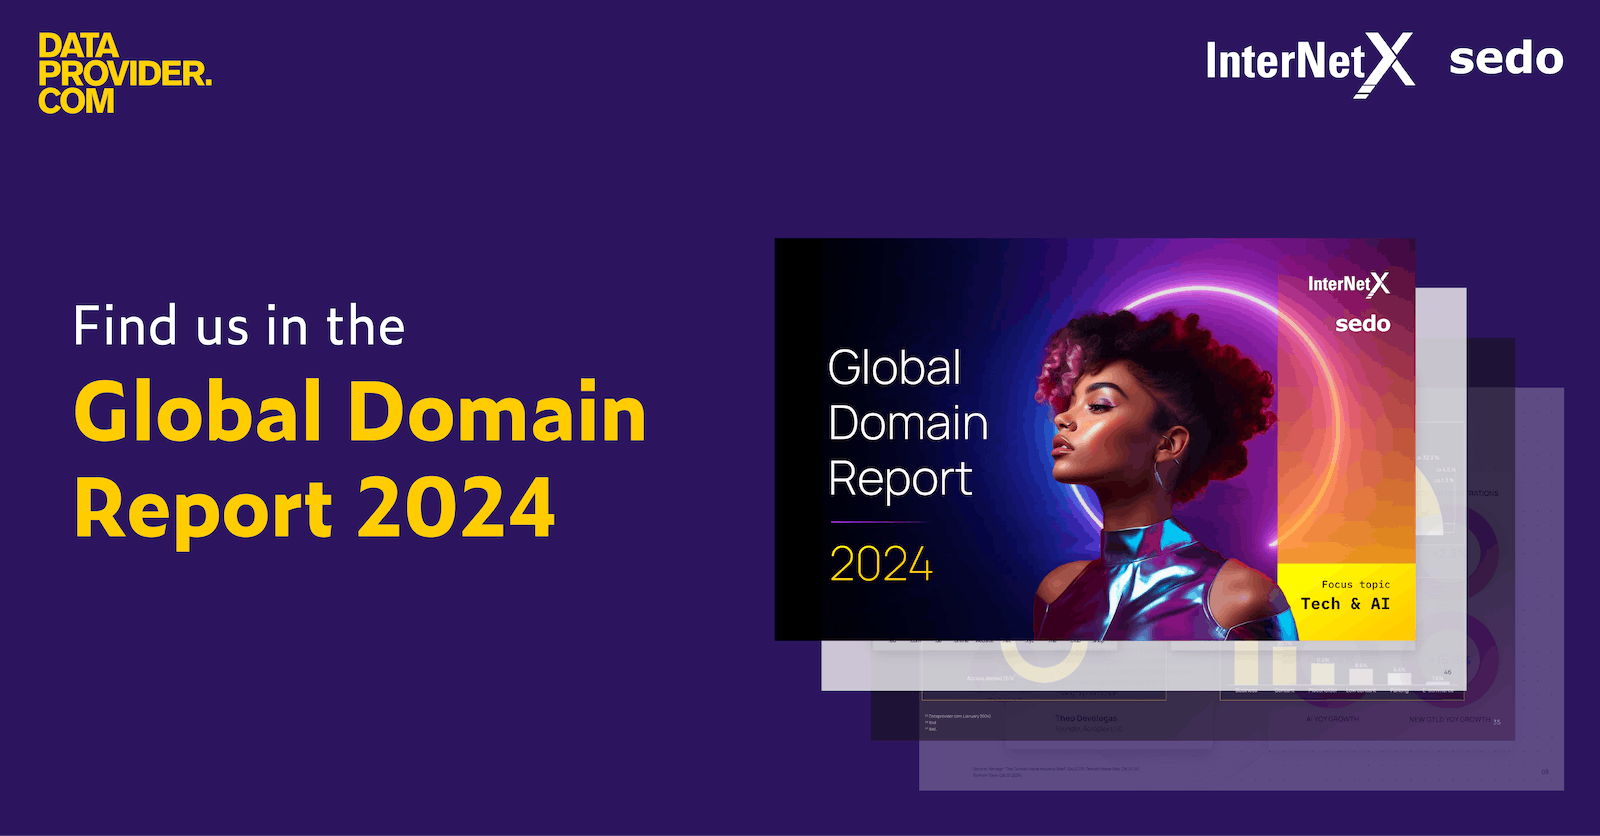 The cover page of the Global Domain Report